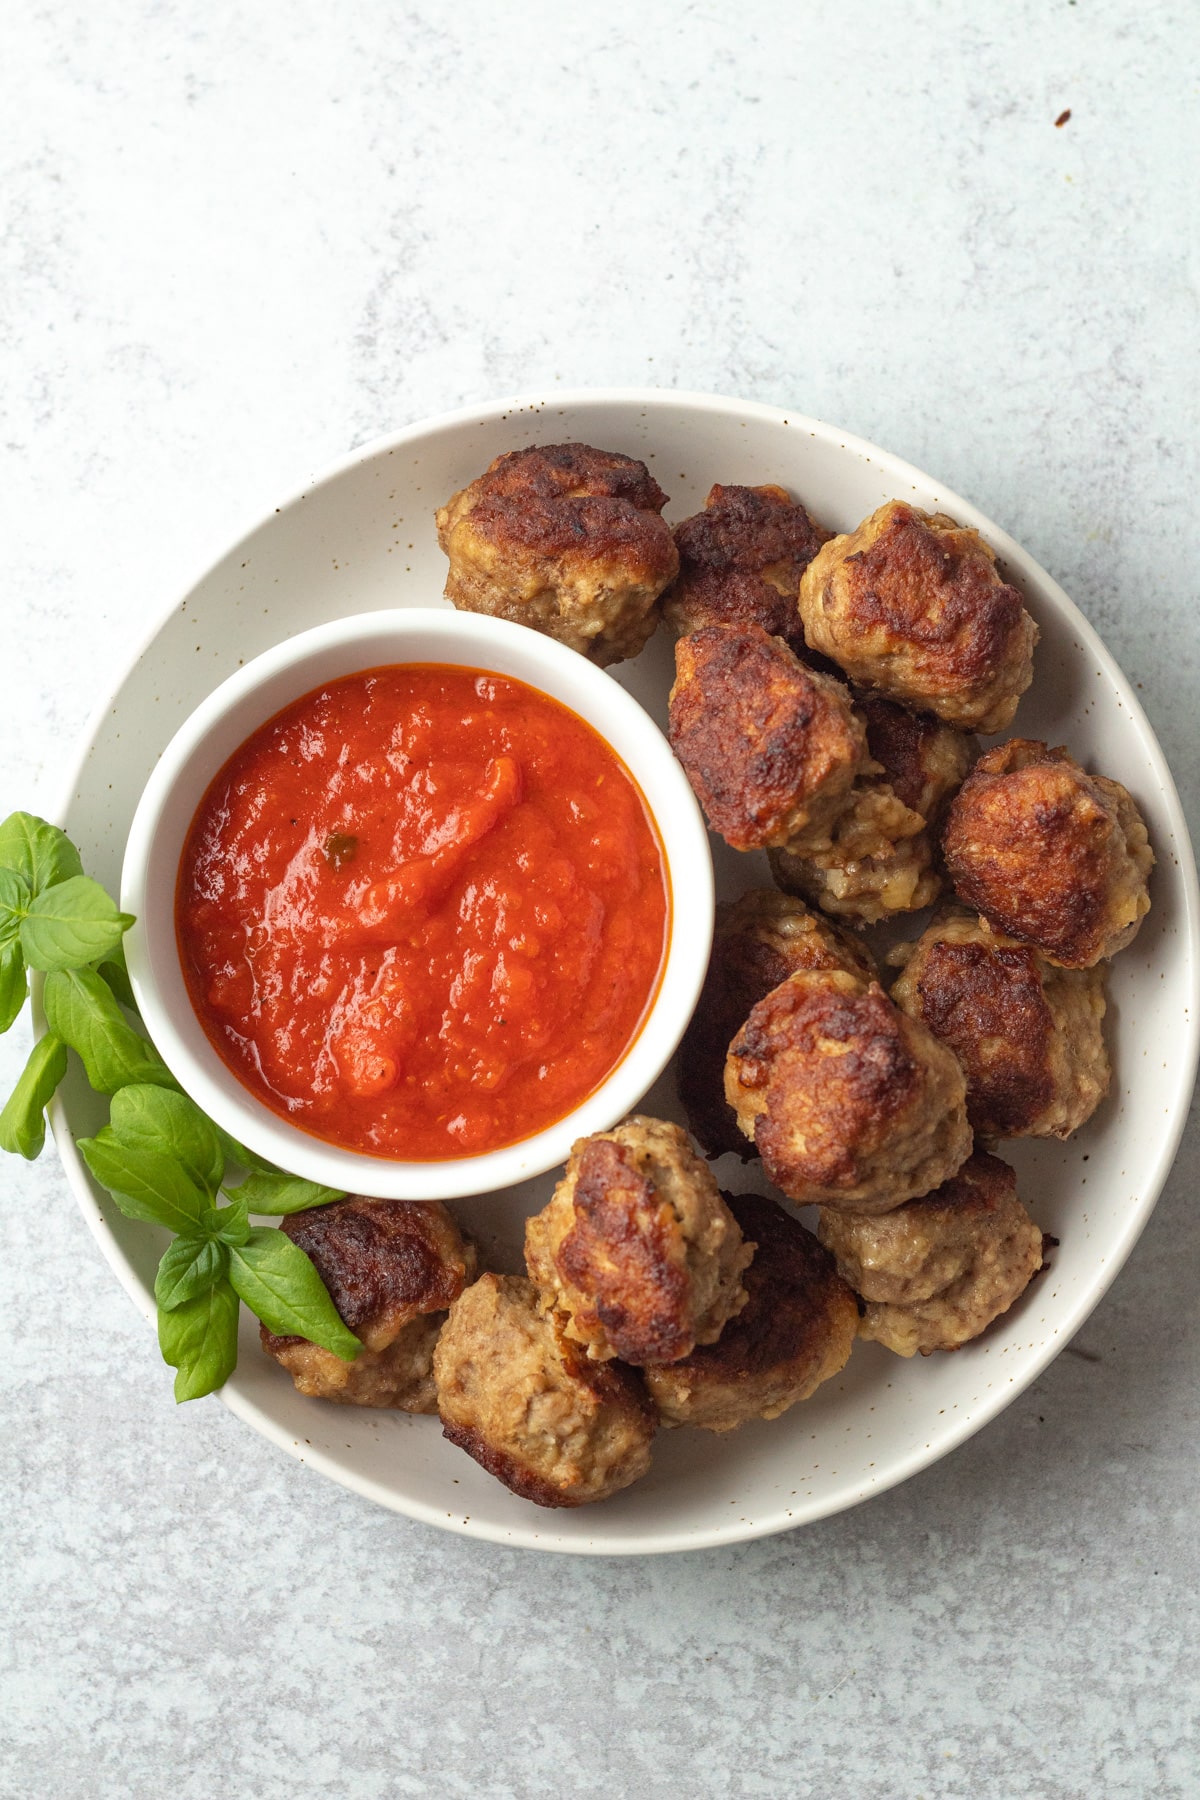 Plate of instant pot turkey meatballs with marinara sauce in small bowl.